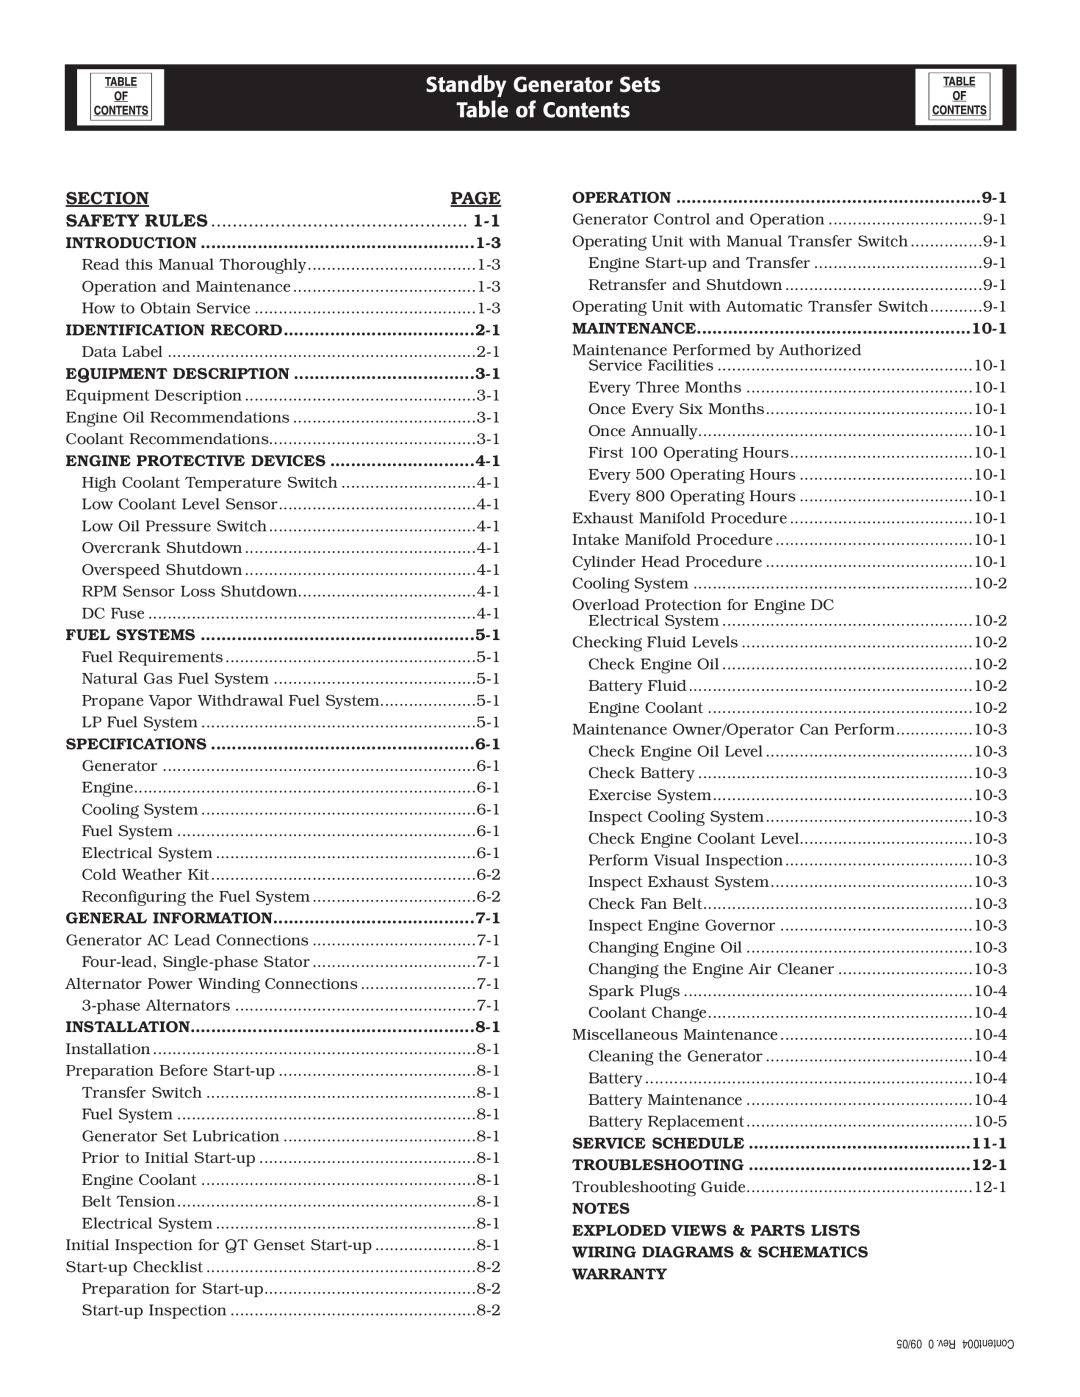 Guardian Technologies 005336-1, 005337-1 owner manual Standby Generator Sets Table of Contents, Section, Page, Safety Rules 